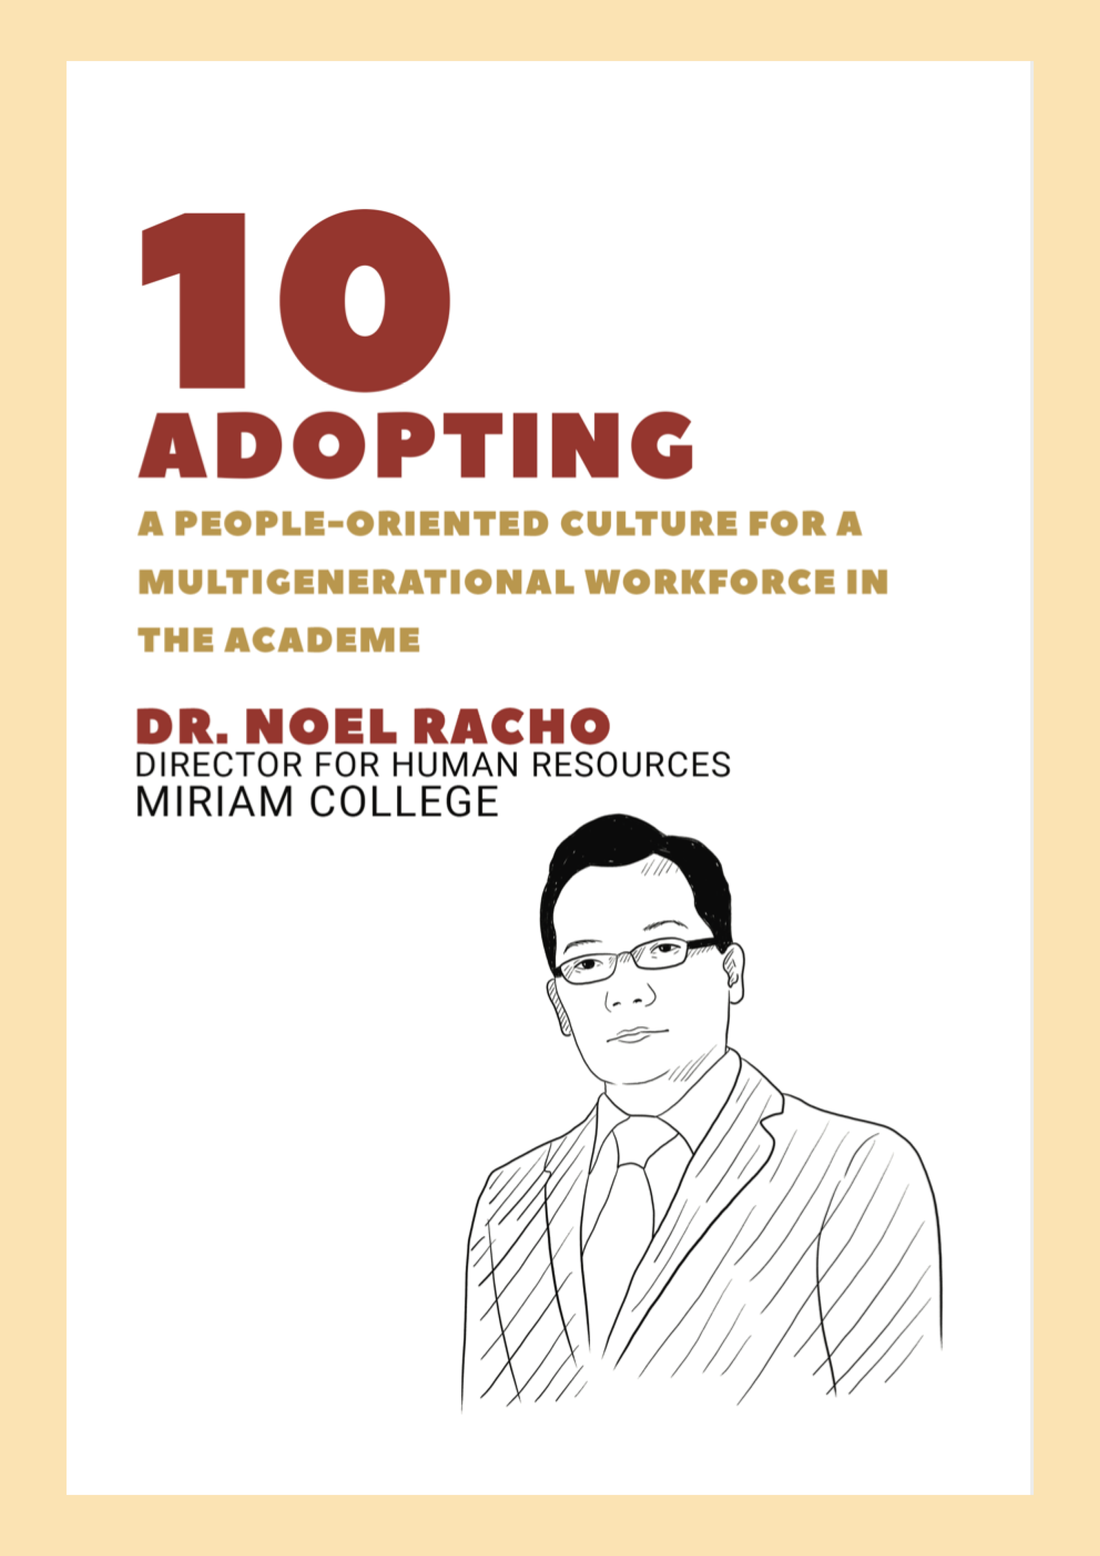 Adopting a People-Oriented Culture for a Multigenerational Workforce in the Academe